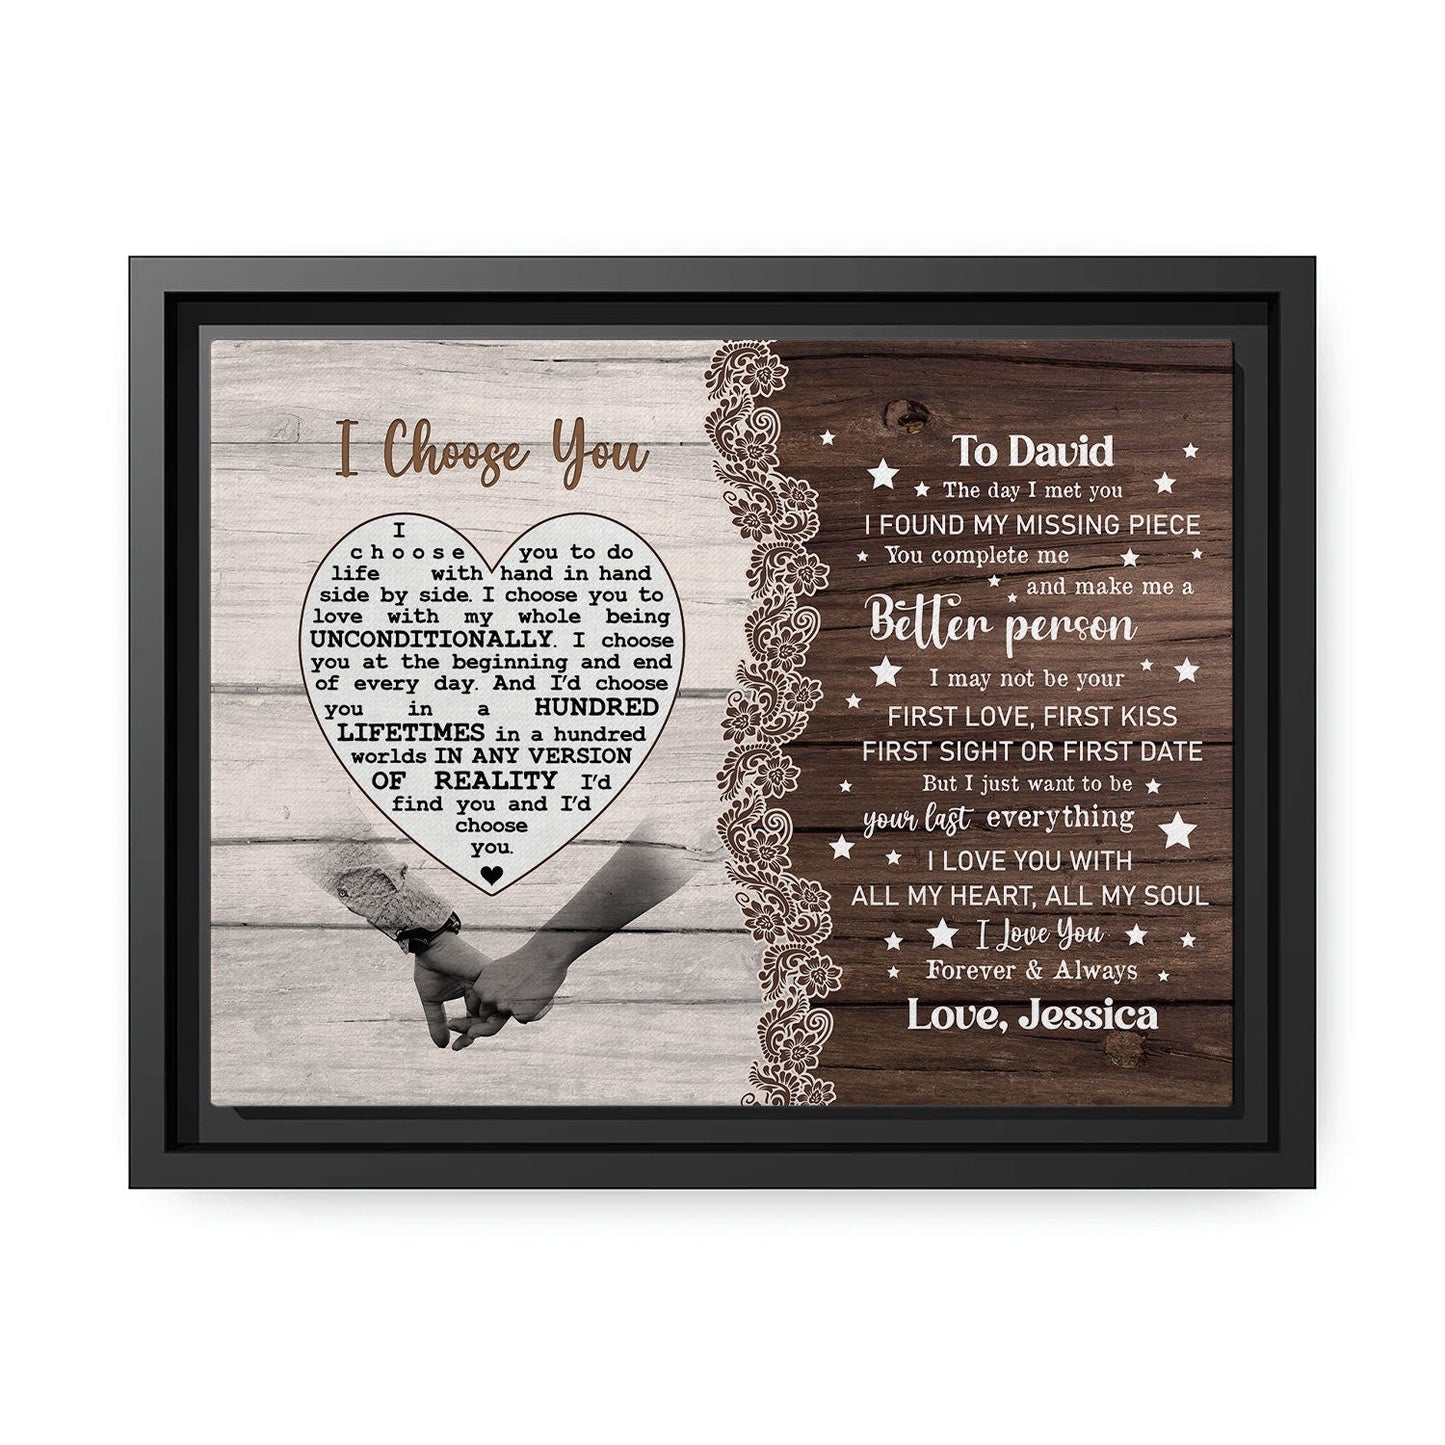 I Choose You - Personalized Wedding Anniversary or Valentine's Day gift for Husband or Wife - Custom Canvas - MyMindfulGifts